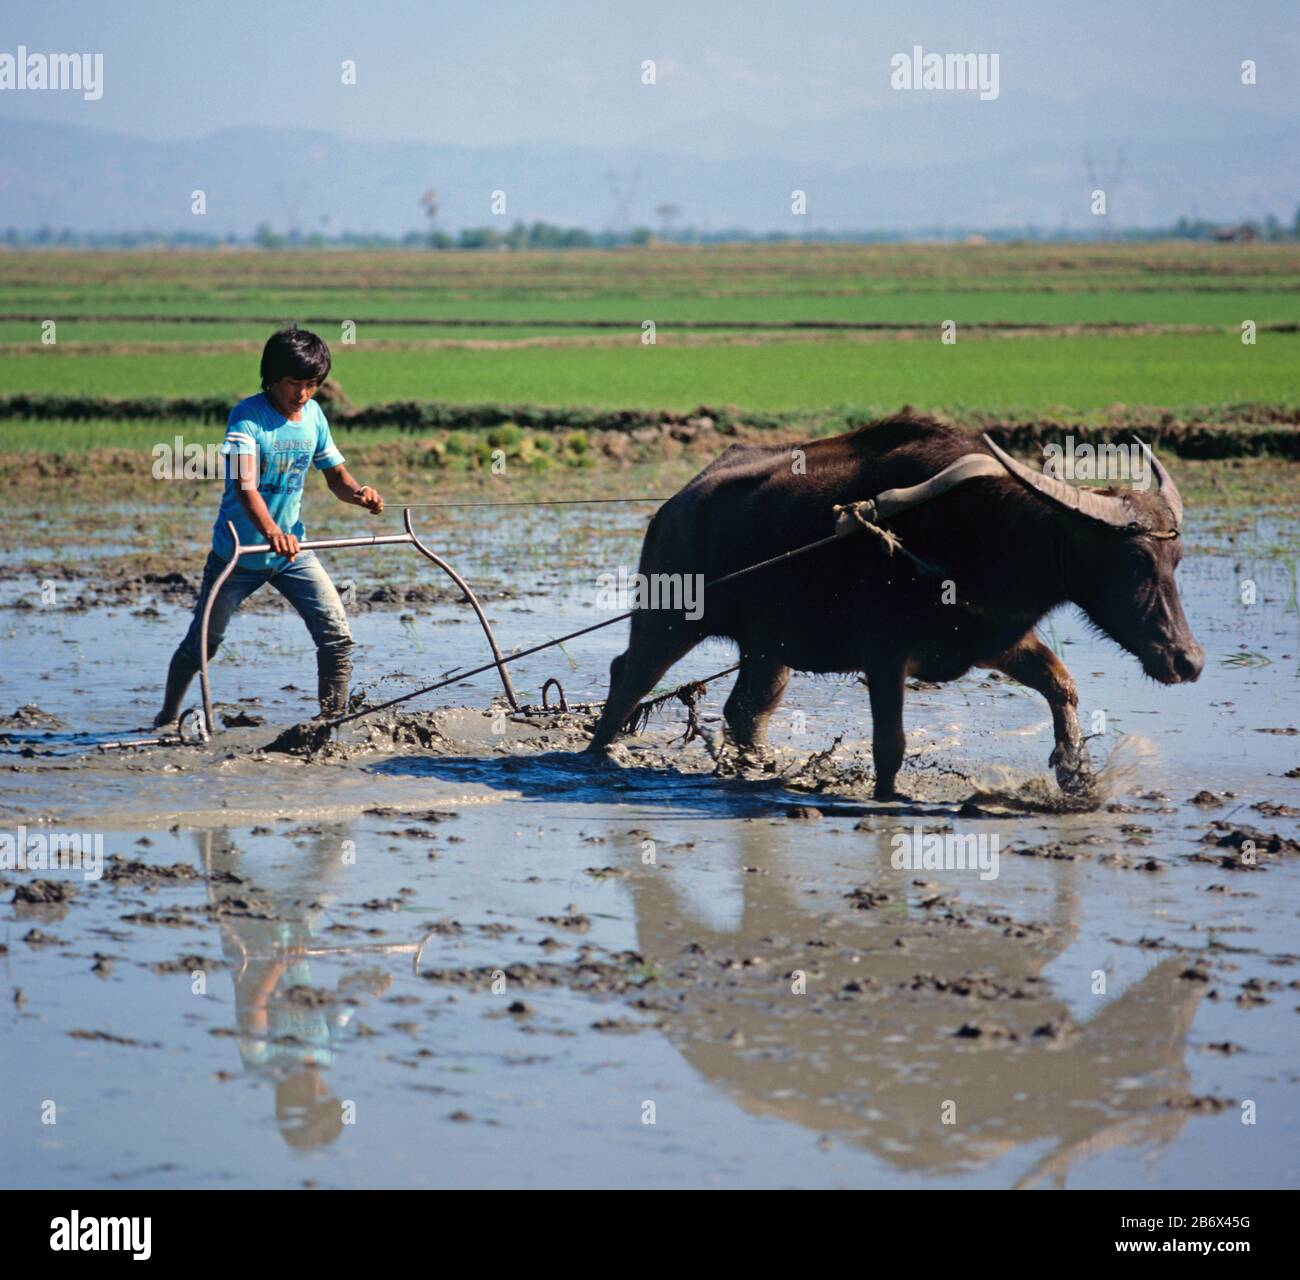 Cultivating a flooded paddy with a water buffalo and metal harrow or plough for a new seedling rice crop, Luzon, Philippines Stock Photo